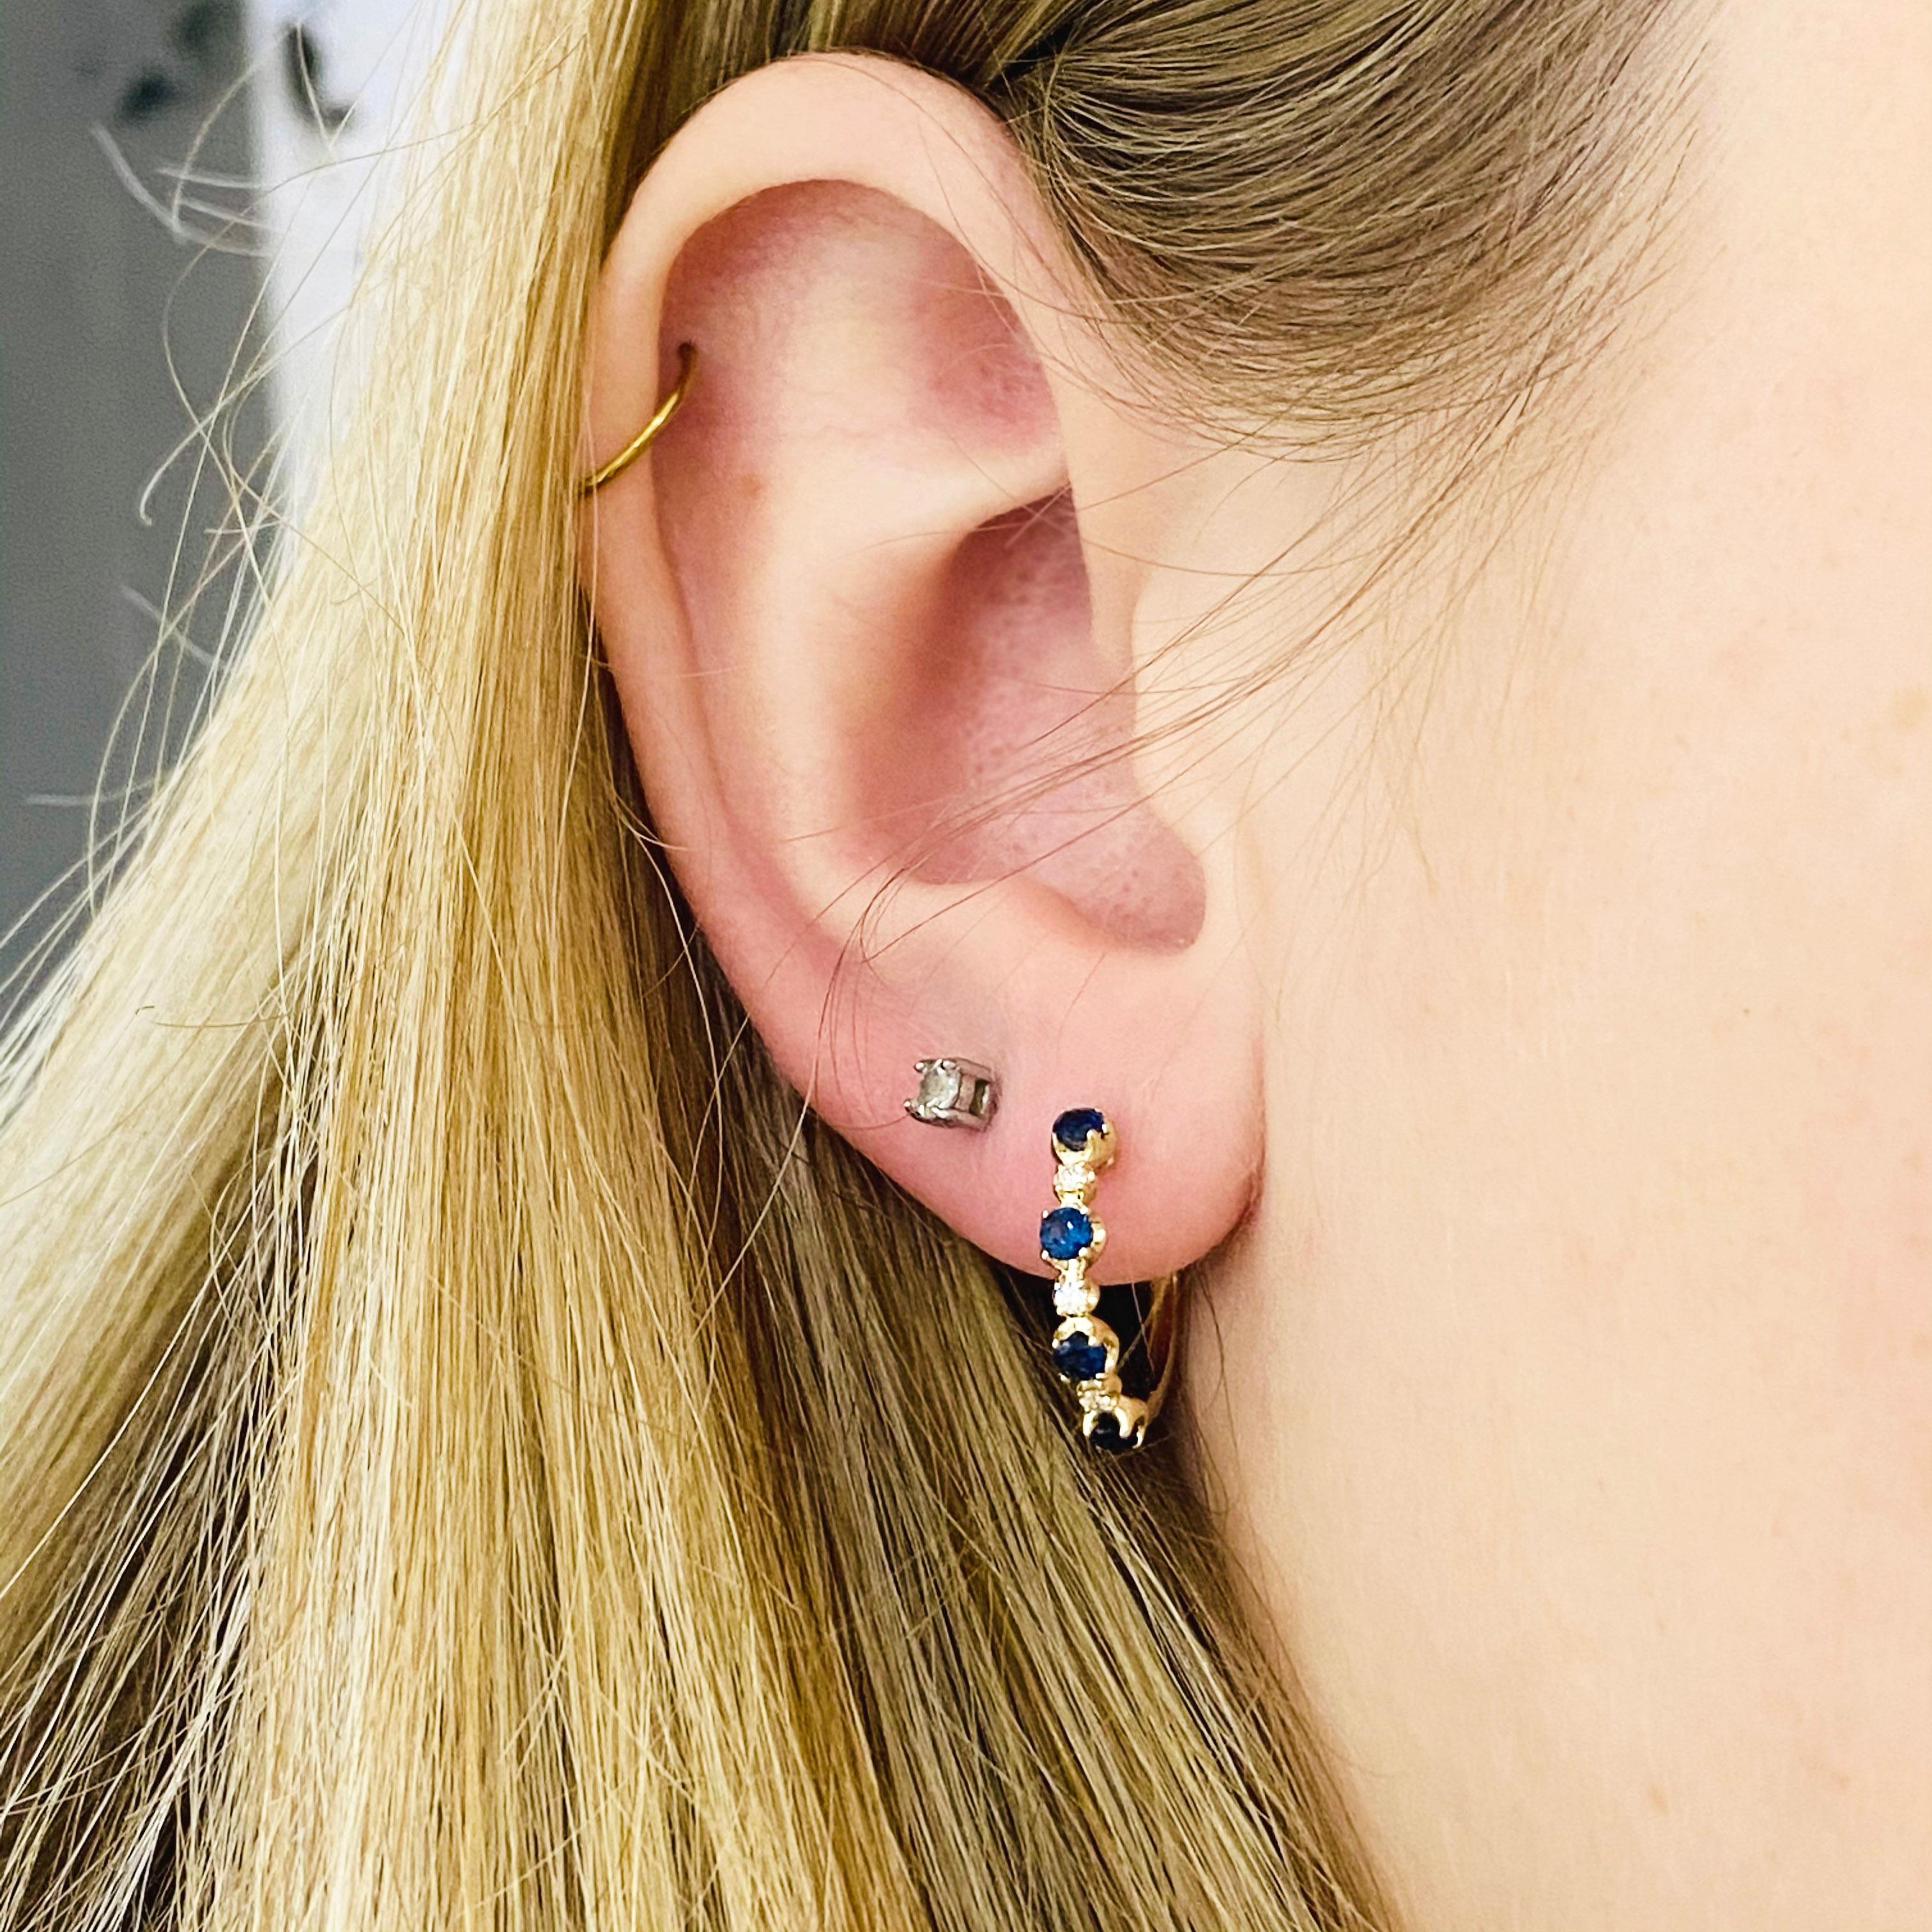 These stunning 14k yellow gold detailed deep blue sapphire huggie hoops dripping with diamonds provide a look that is both trendy and classic. These sapphire and diamond earrings are a great staple to add to your collection, and can be worn with